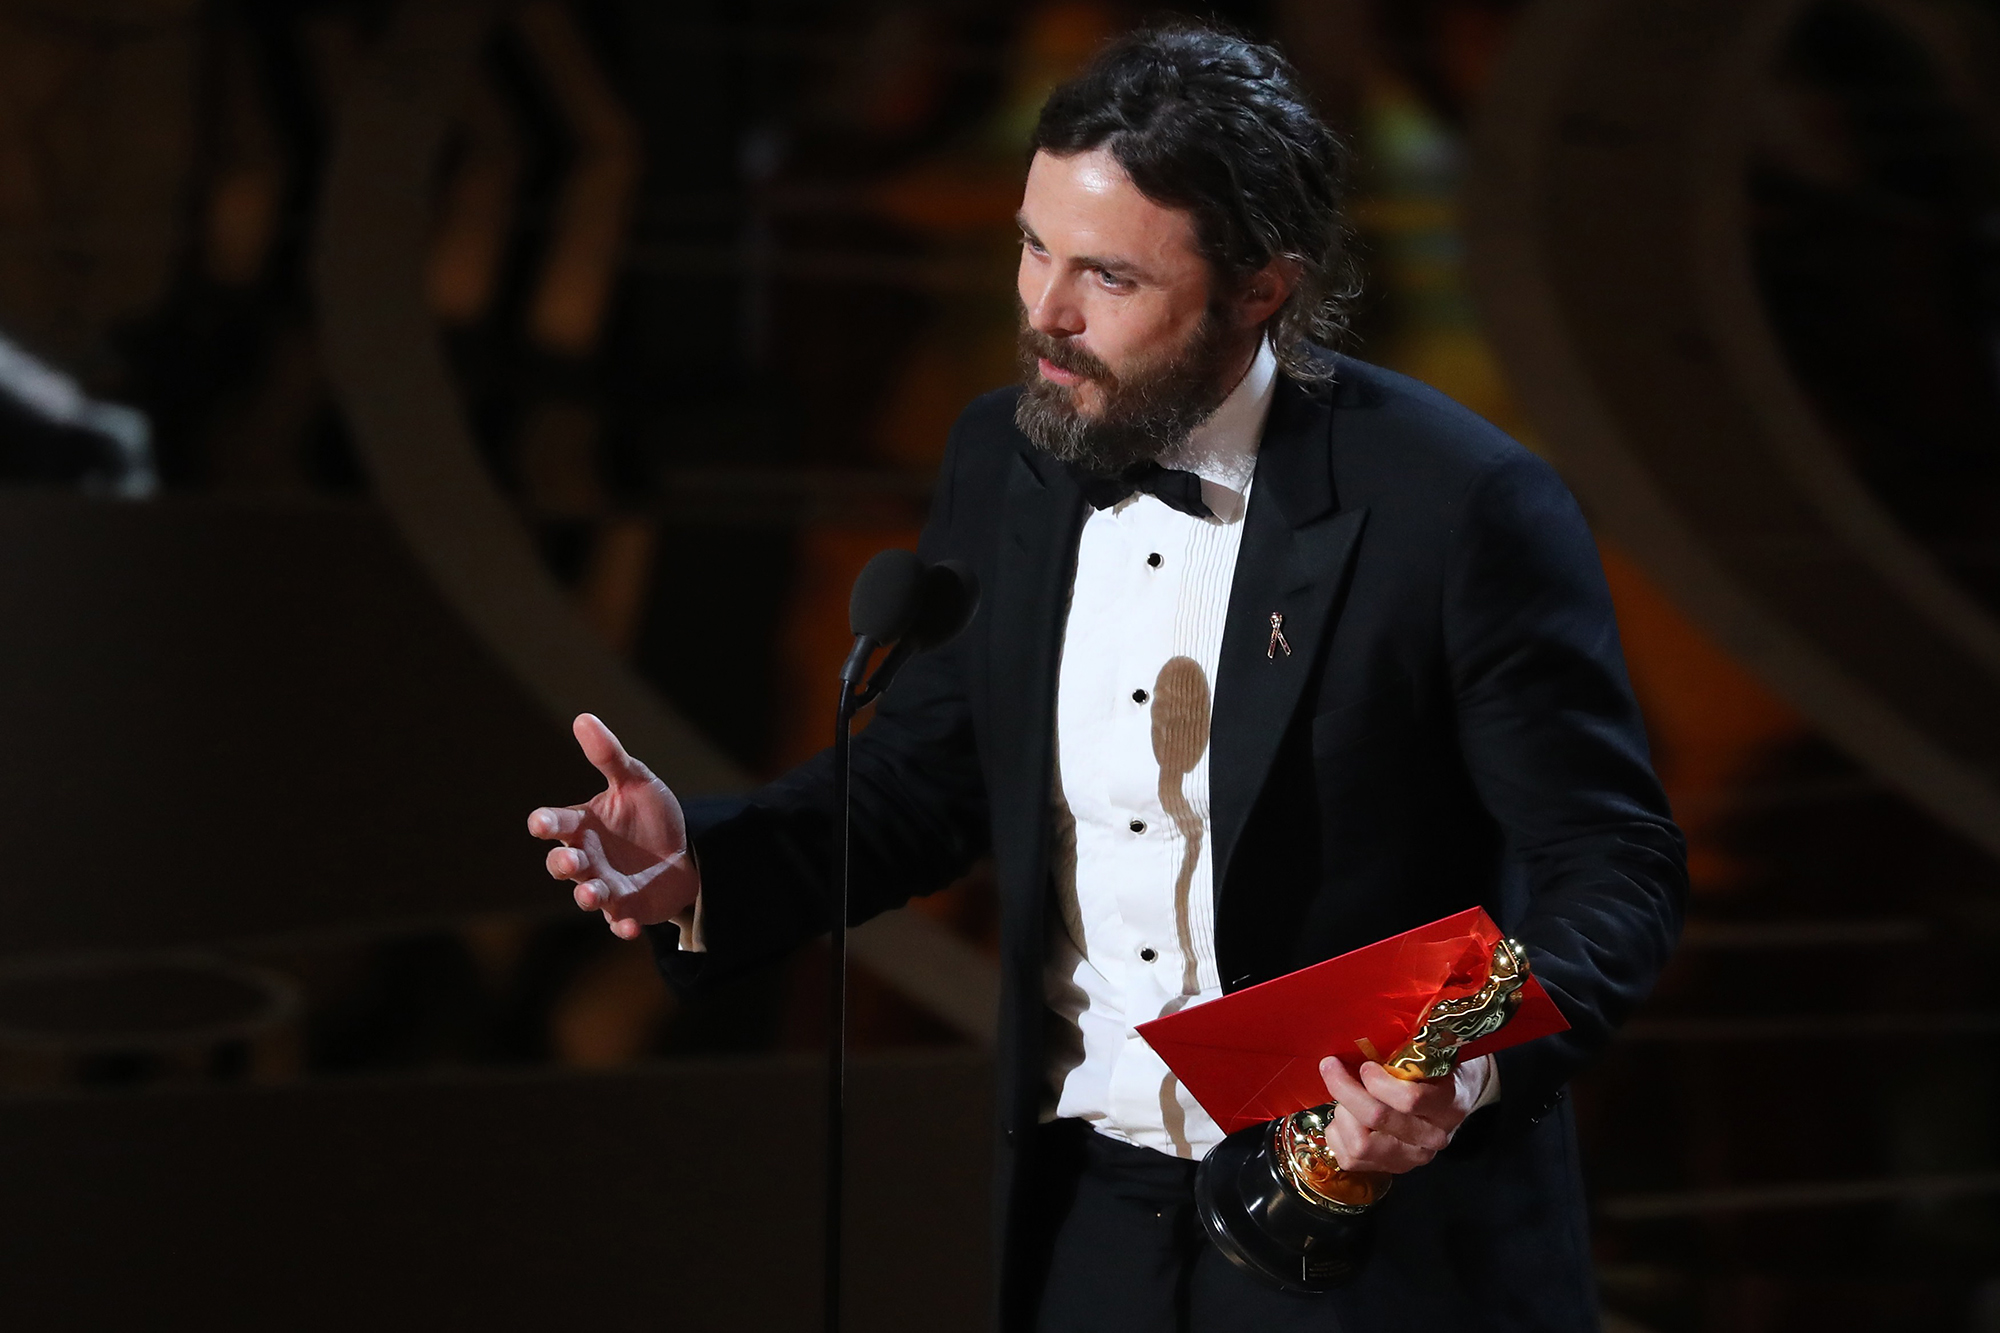 Casey Affleck speaks as he accepts the Oscar for Best Actor for <i>Manchester by the Sea</i>, on Feb. 27, 2017 in Hollywood, Calif. (Lucy Nicholson—Reuters)